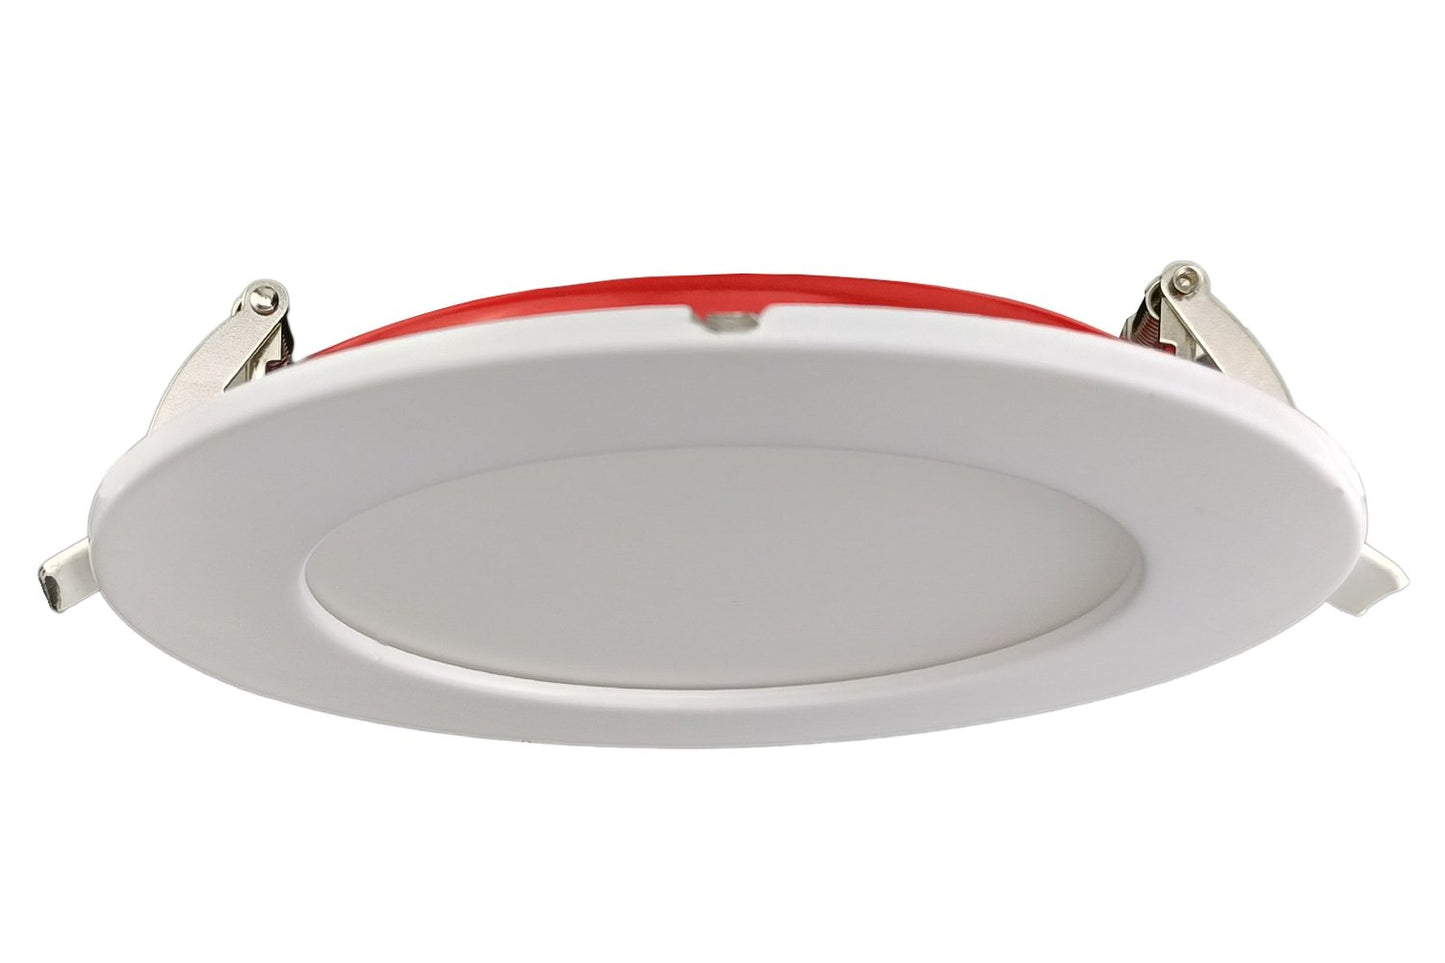 GDL-G96923Goodlite G-96923 5" 15W LED Round Recessed Slim Spotlight Selectable CCT Fire Rated